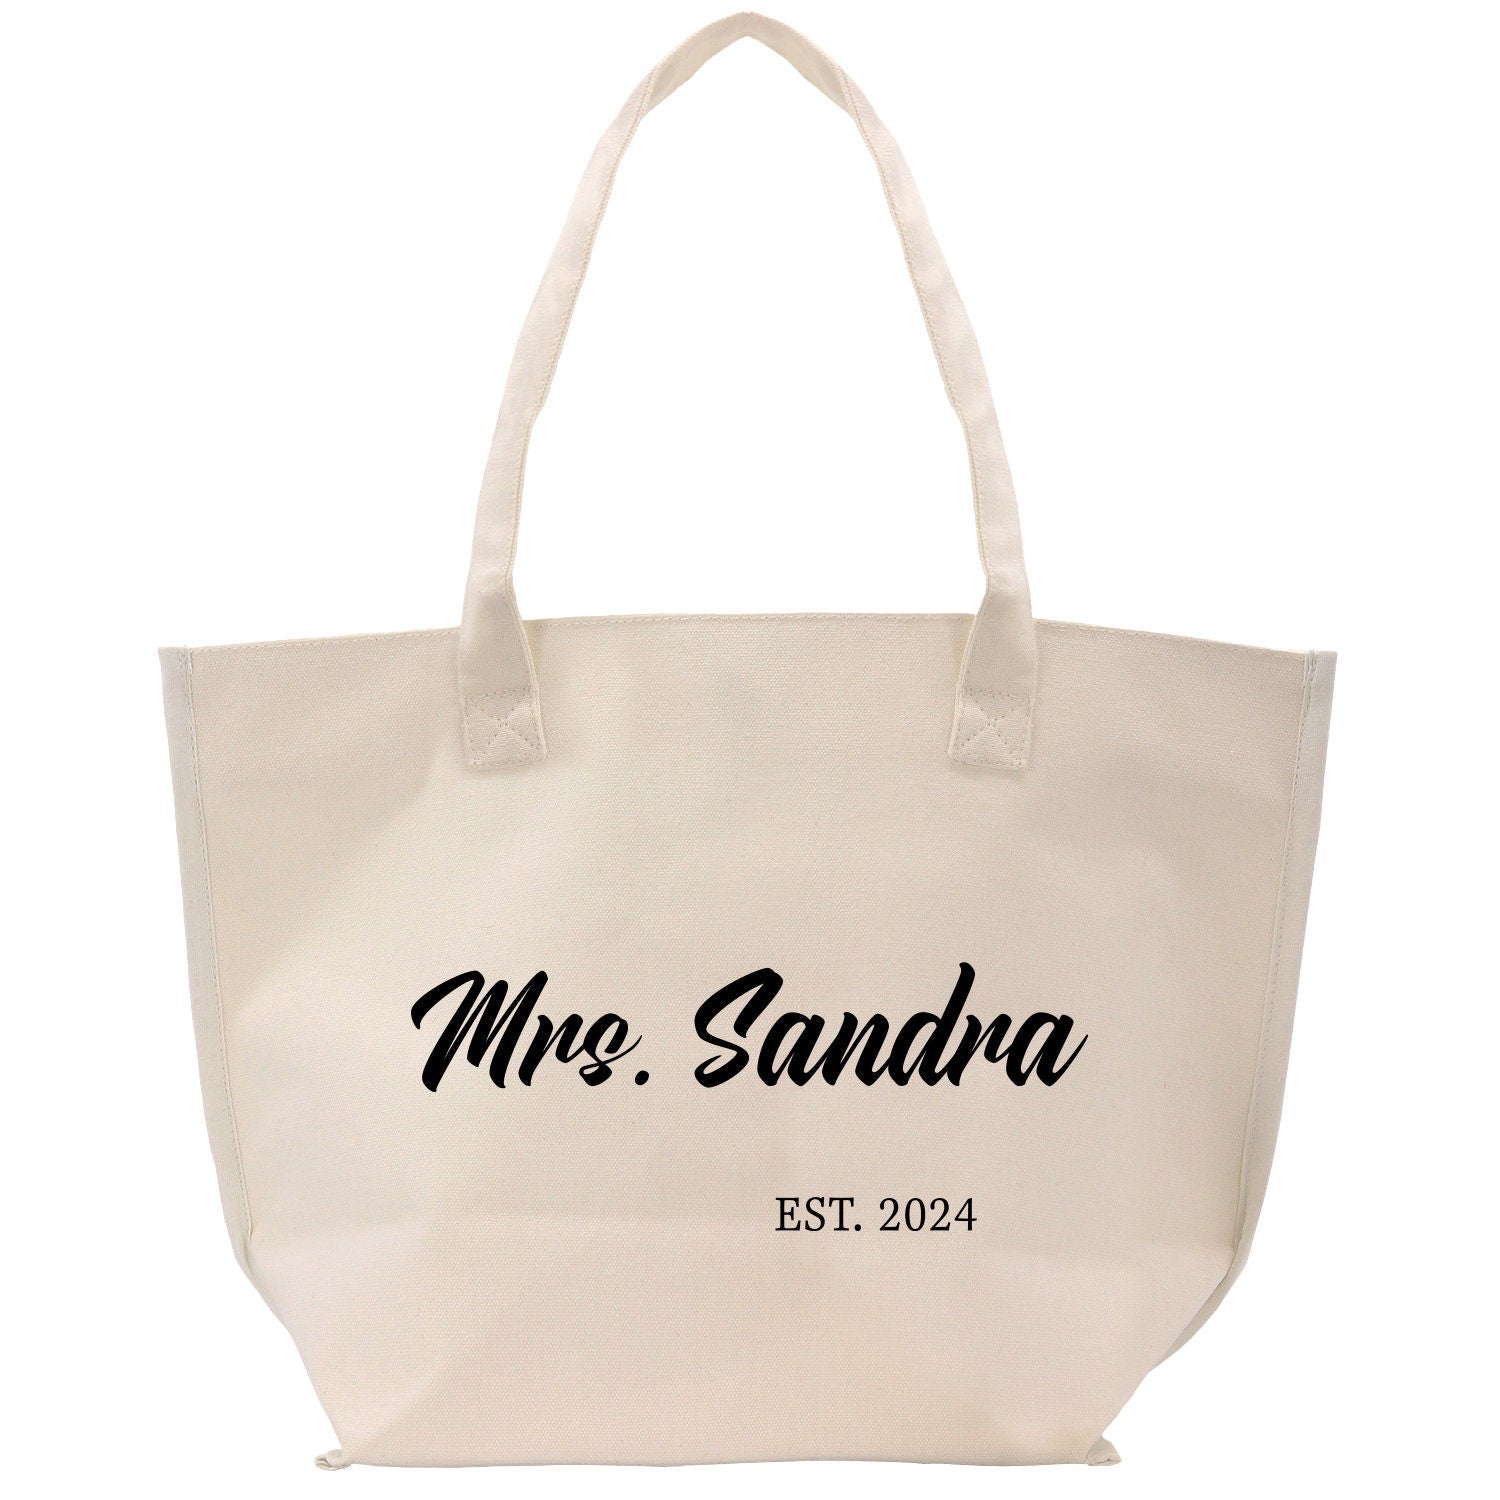 a white tote bag with the words mr sandba on it